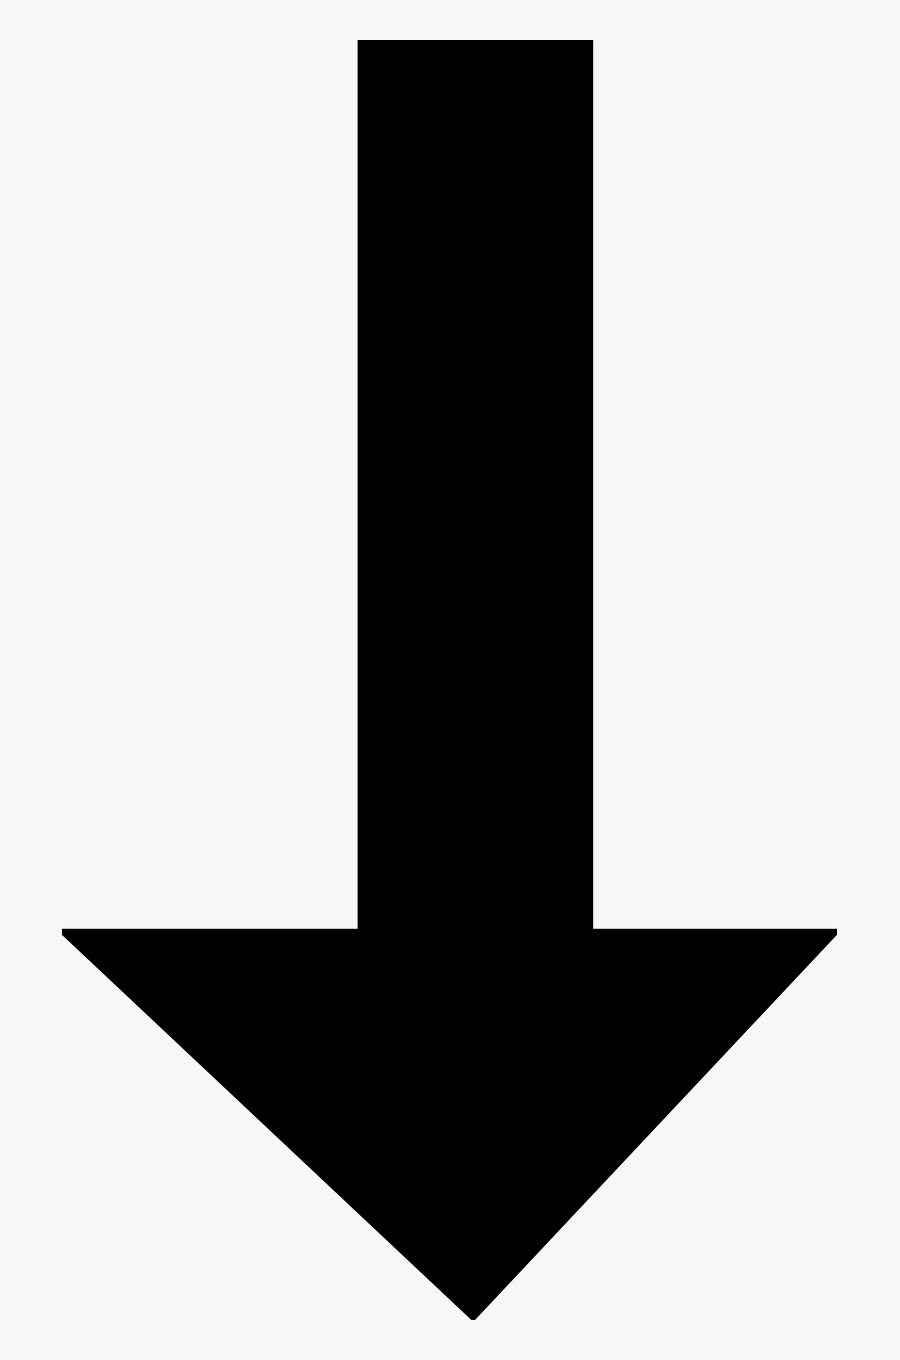 Png Black And White Downward Png Image Picpng - Arrow Pointing Down Png, Transparent Clipart